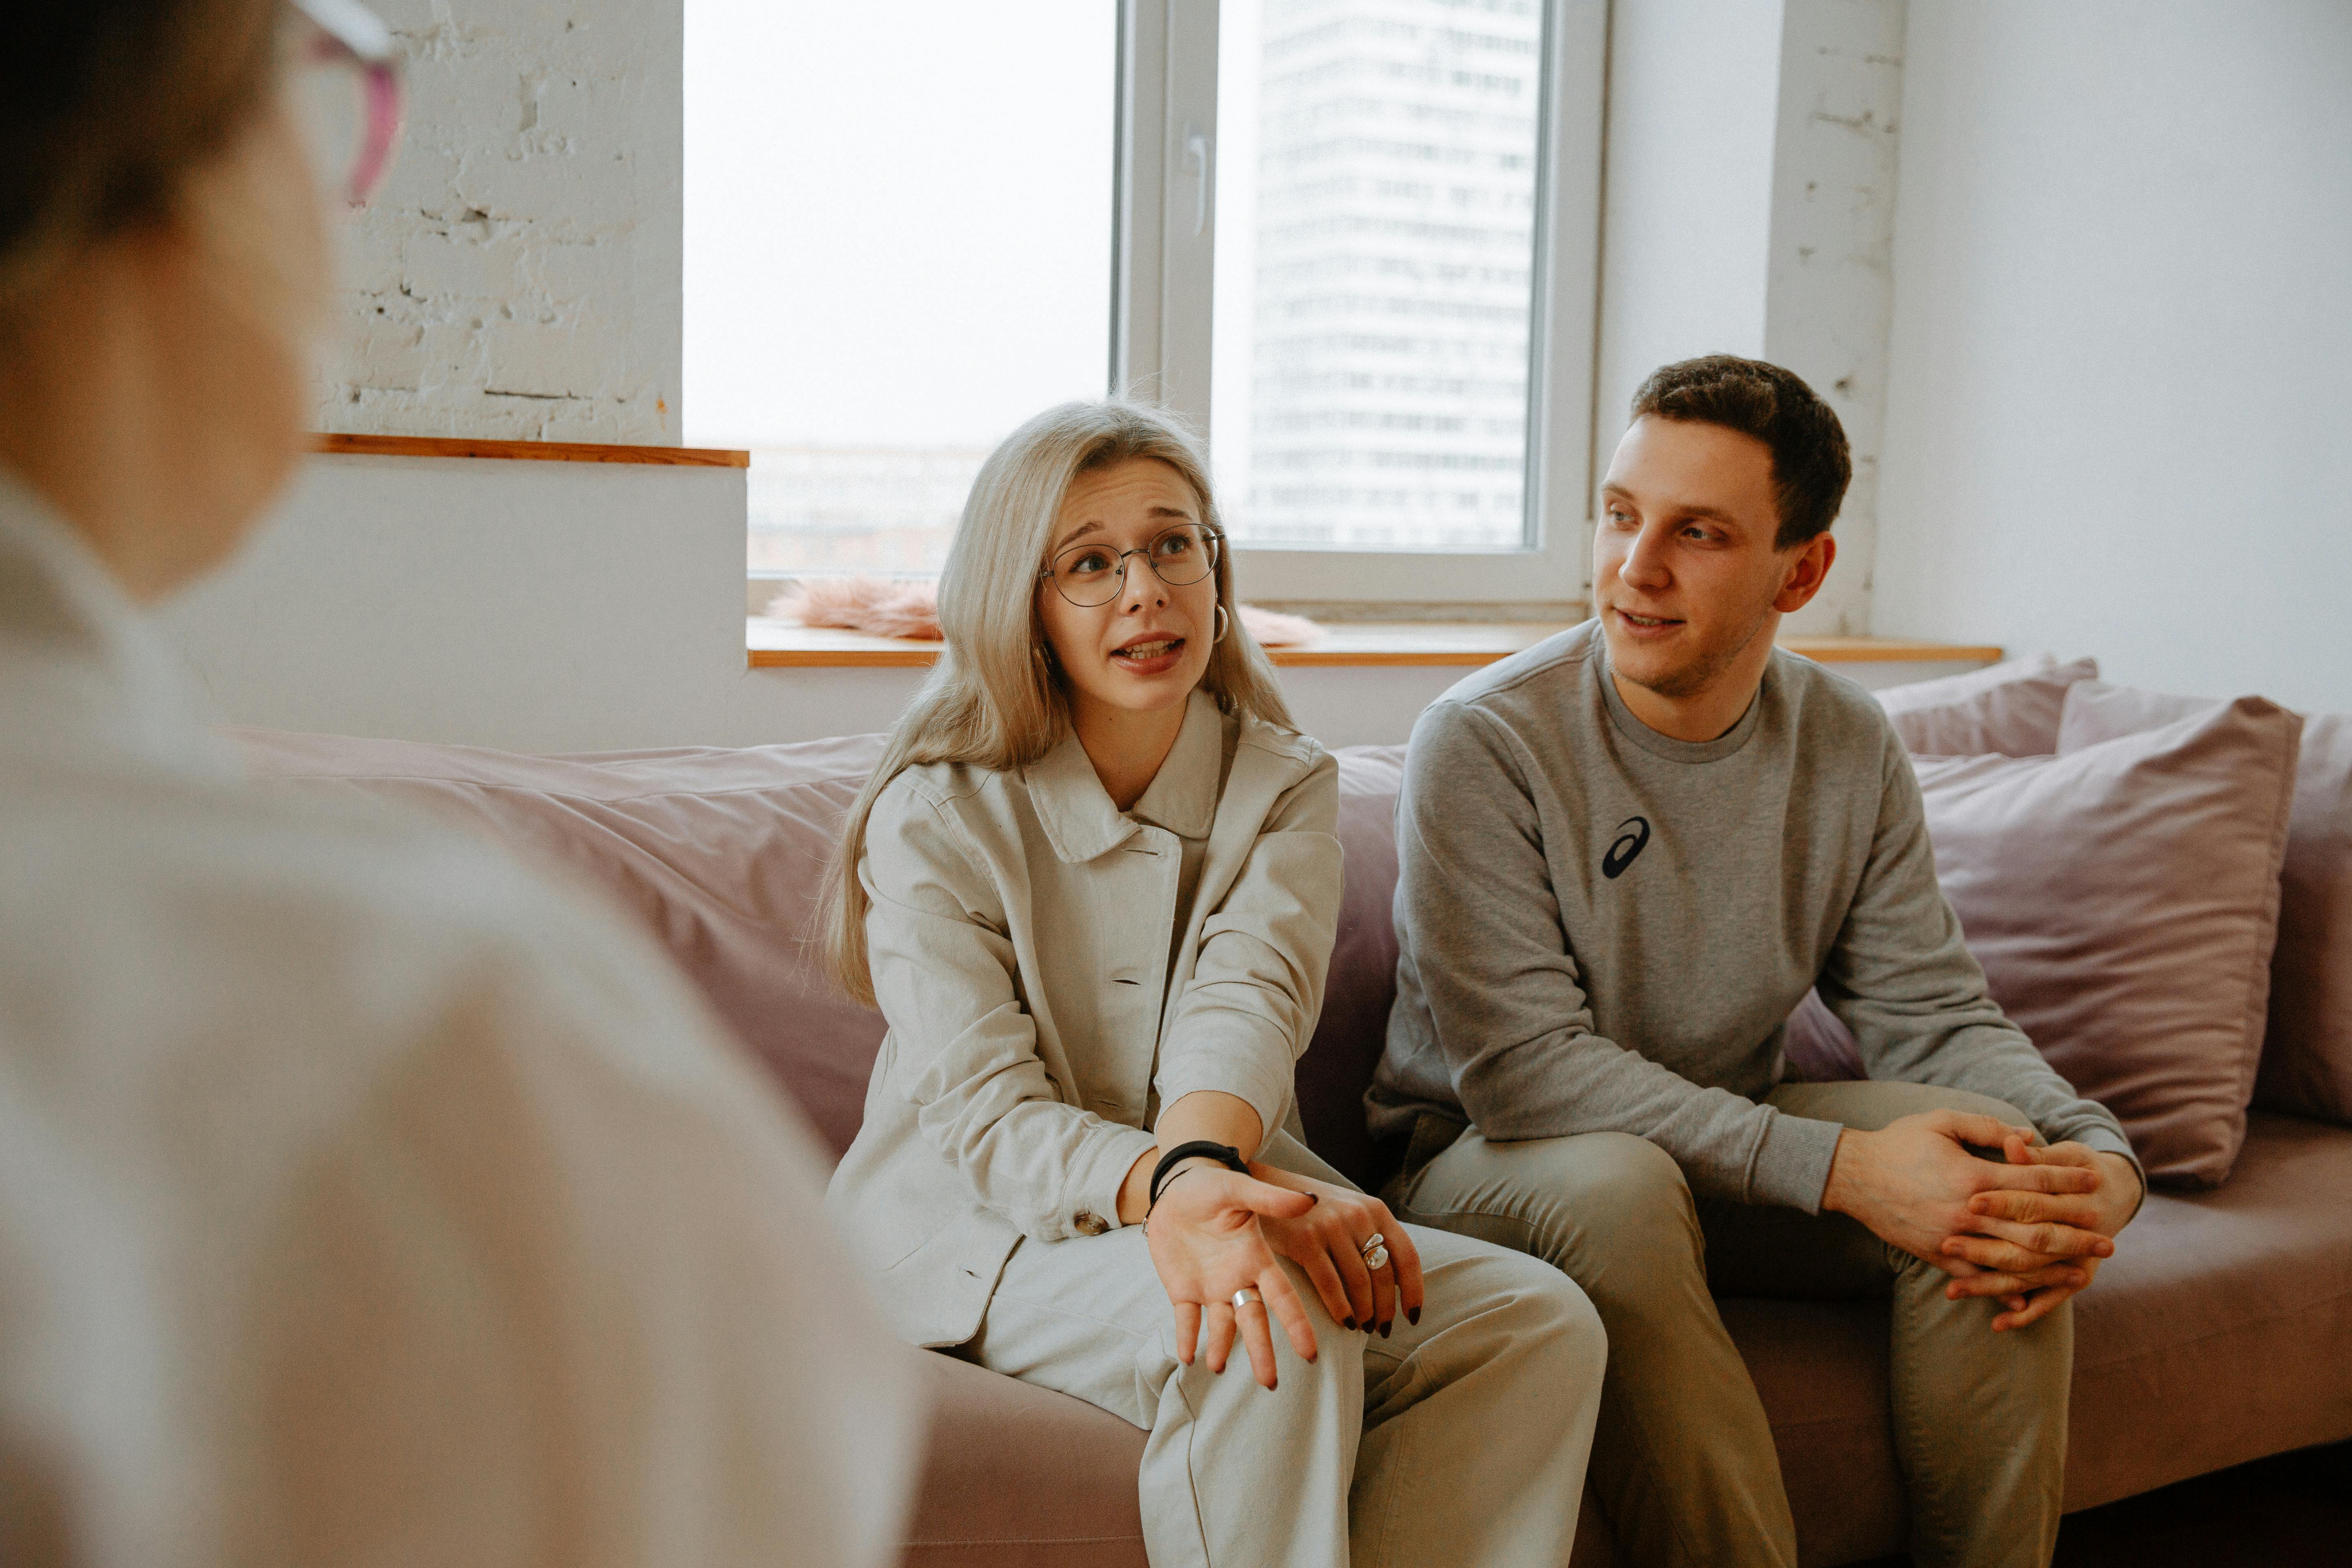 A couple talking with a therapist | Source: Pexels